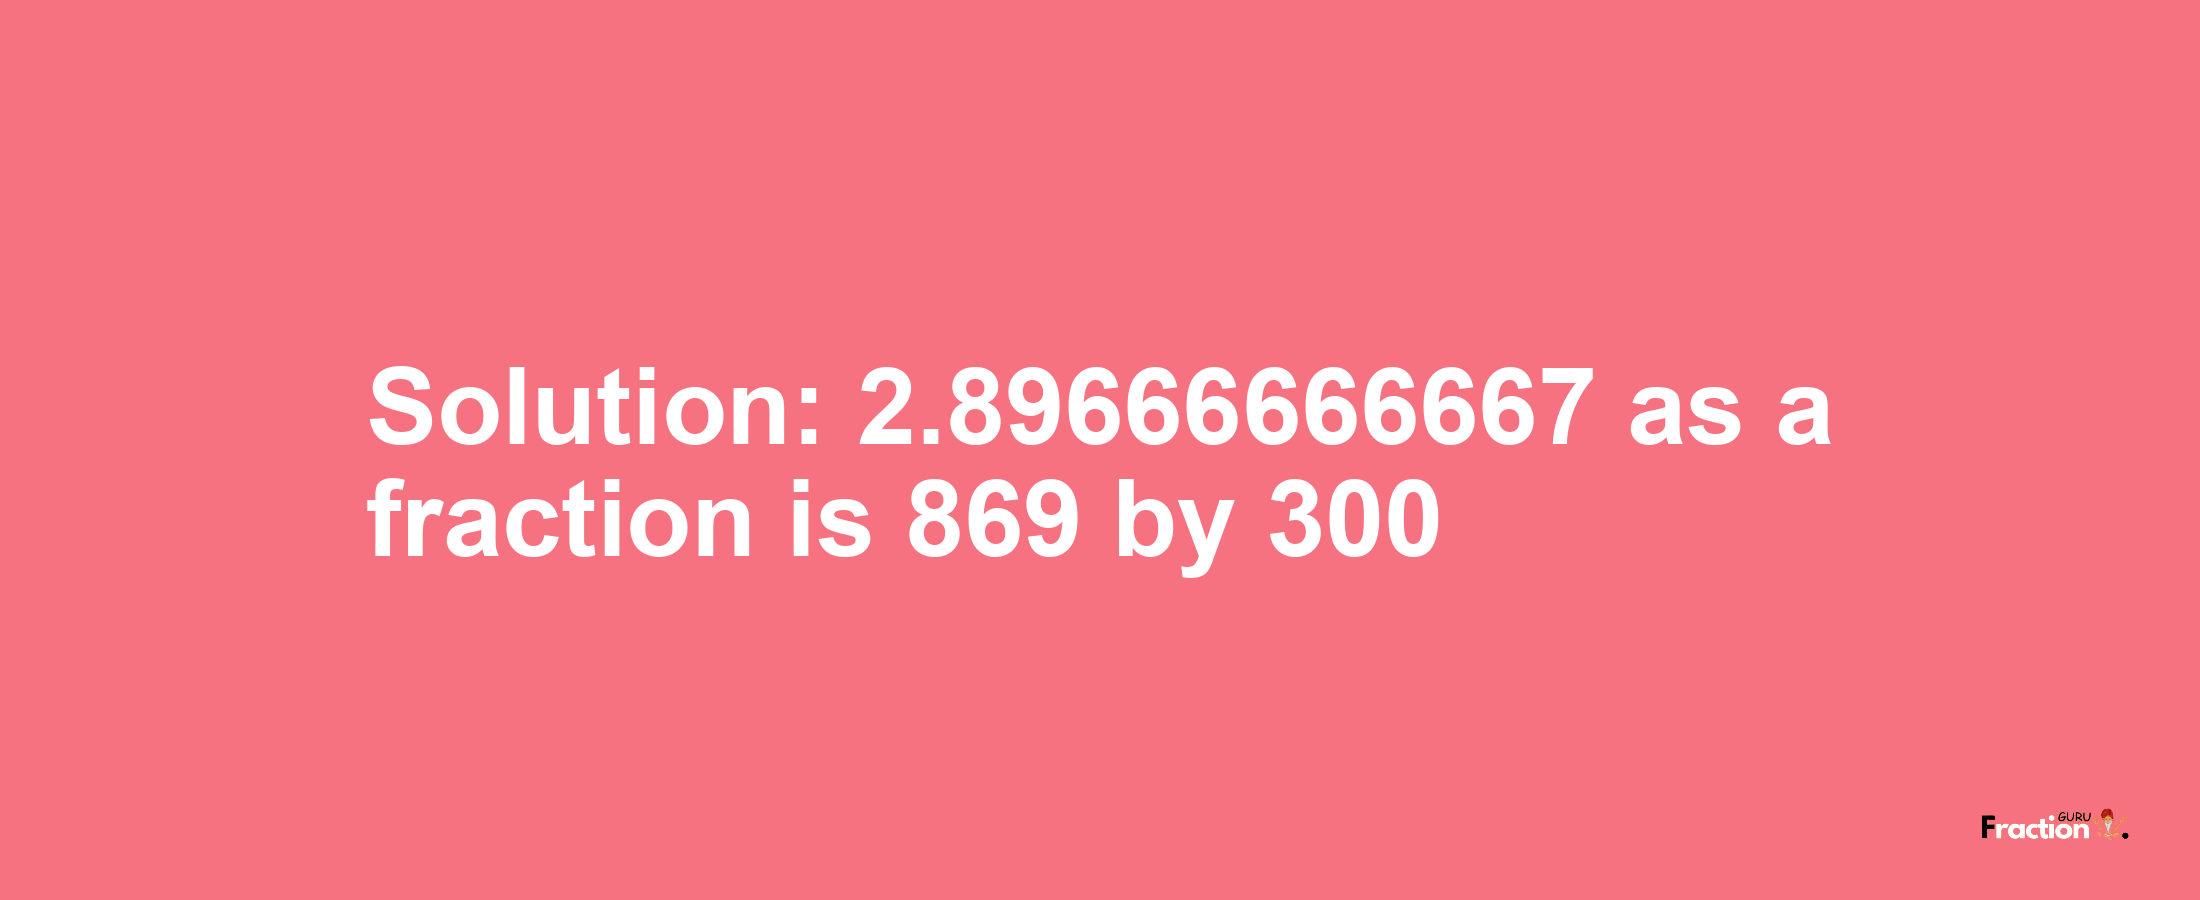 Solution:2.89666666667 as a fraction is 869/300